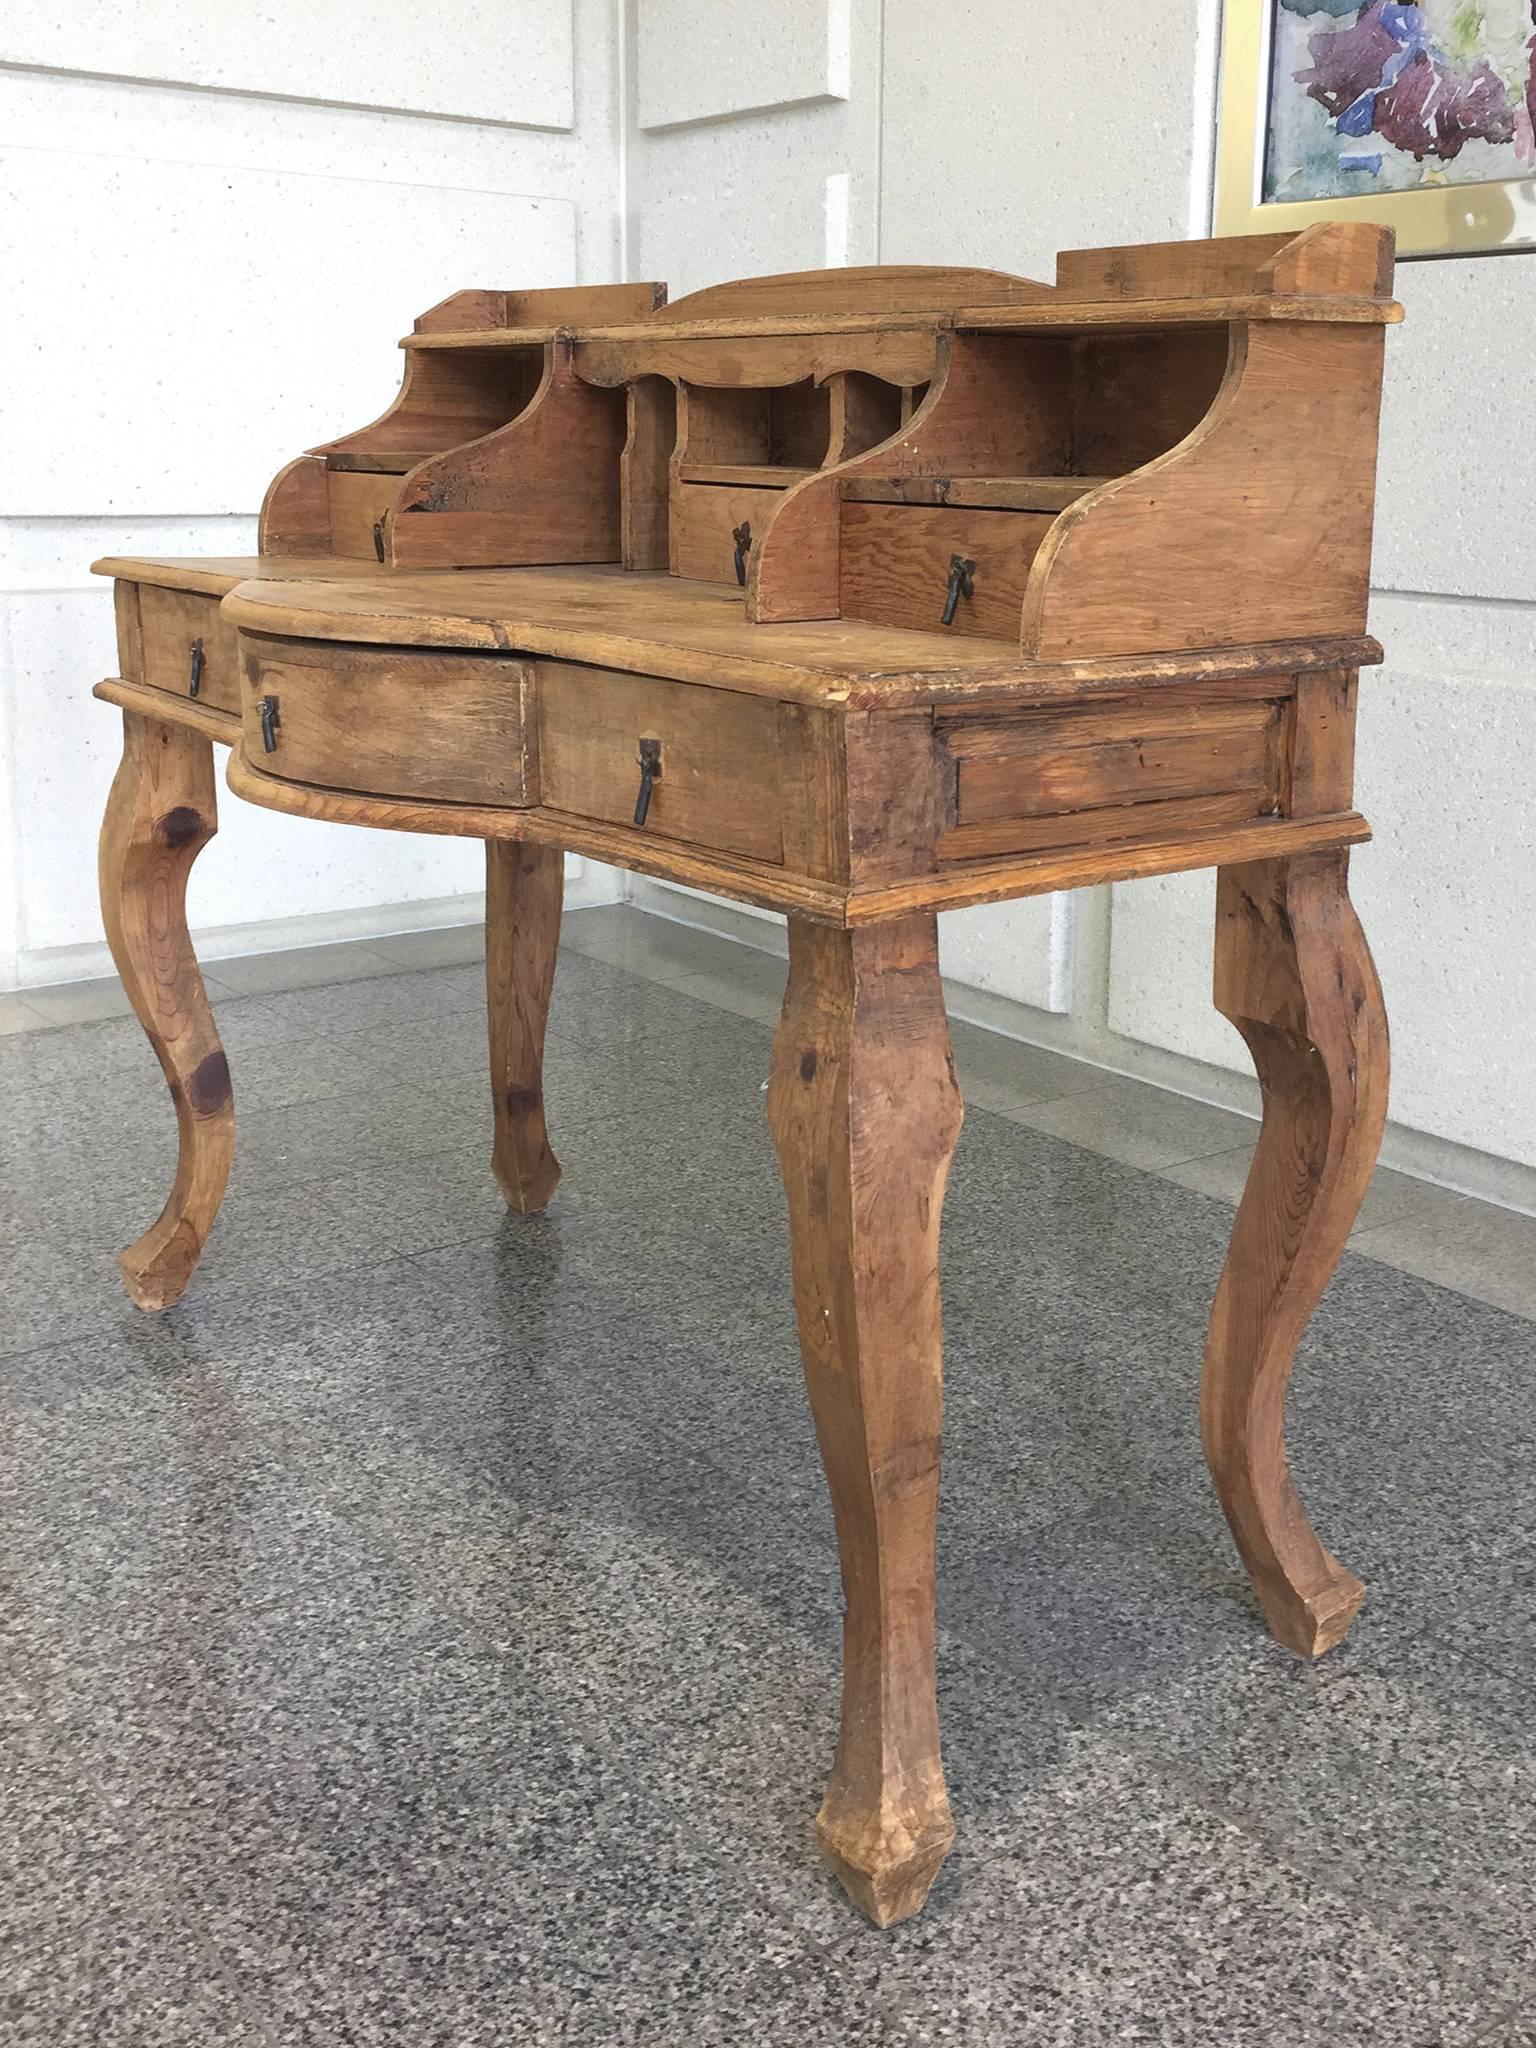 This 20th century French country desk is carved from pine wood. Its design is striking for its bare surface and stark lines. The cabriole legs, standing at 26 inches in height, beautifully lift the desktop; with their beautiful curves, the legs